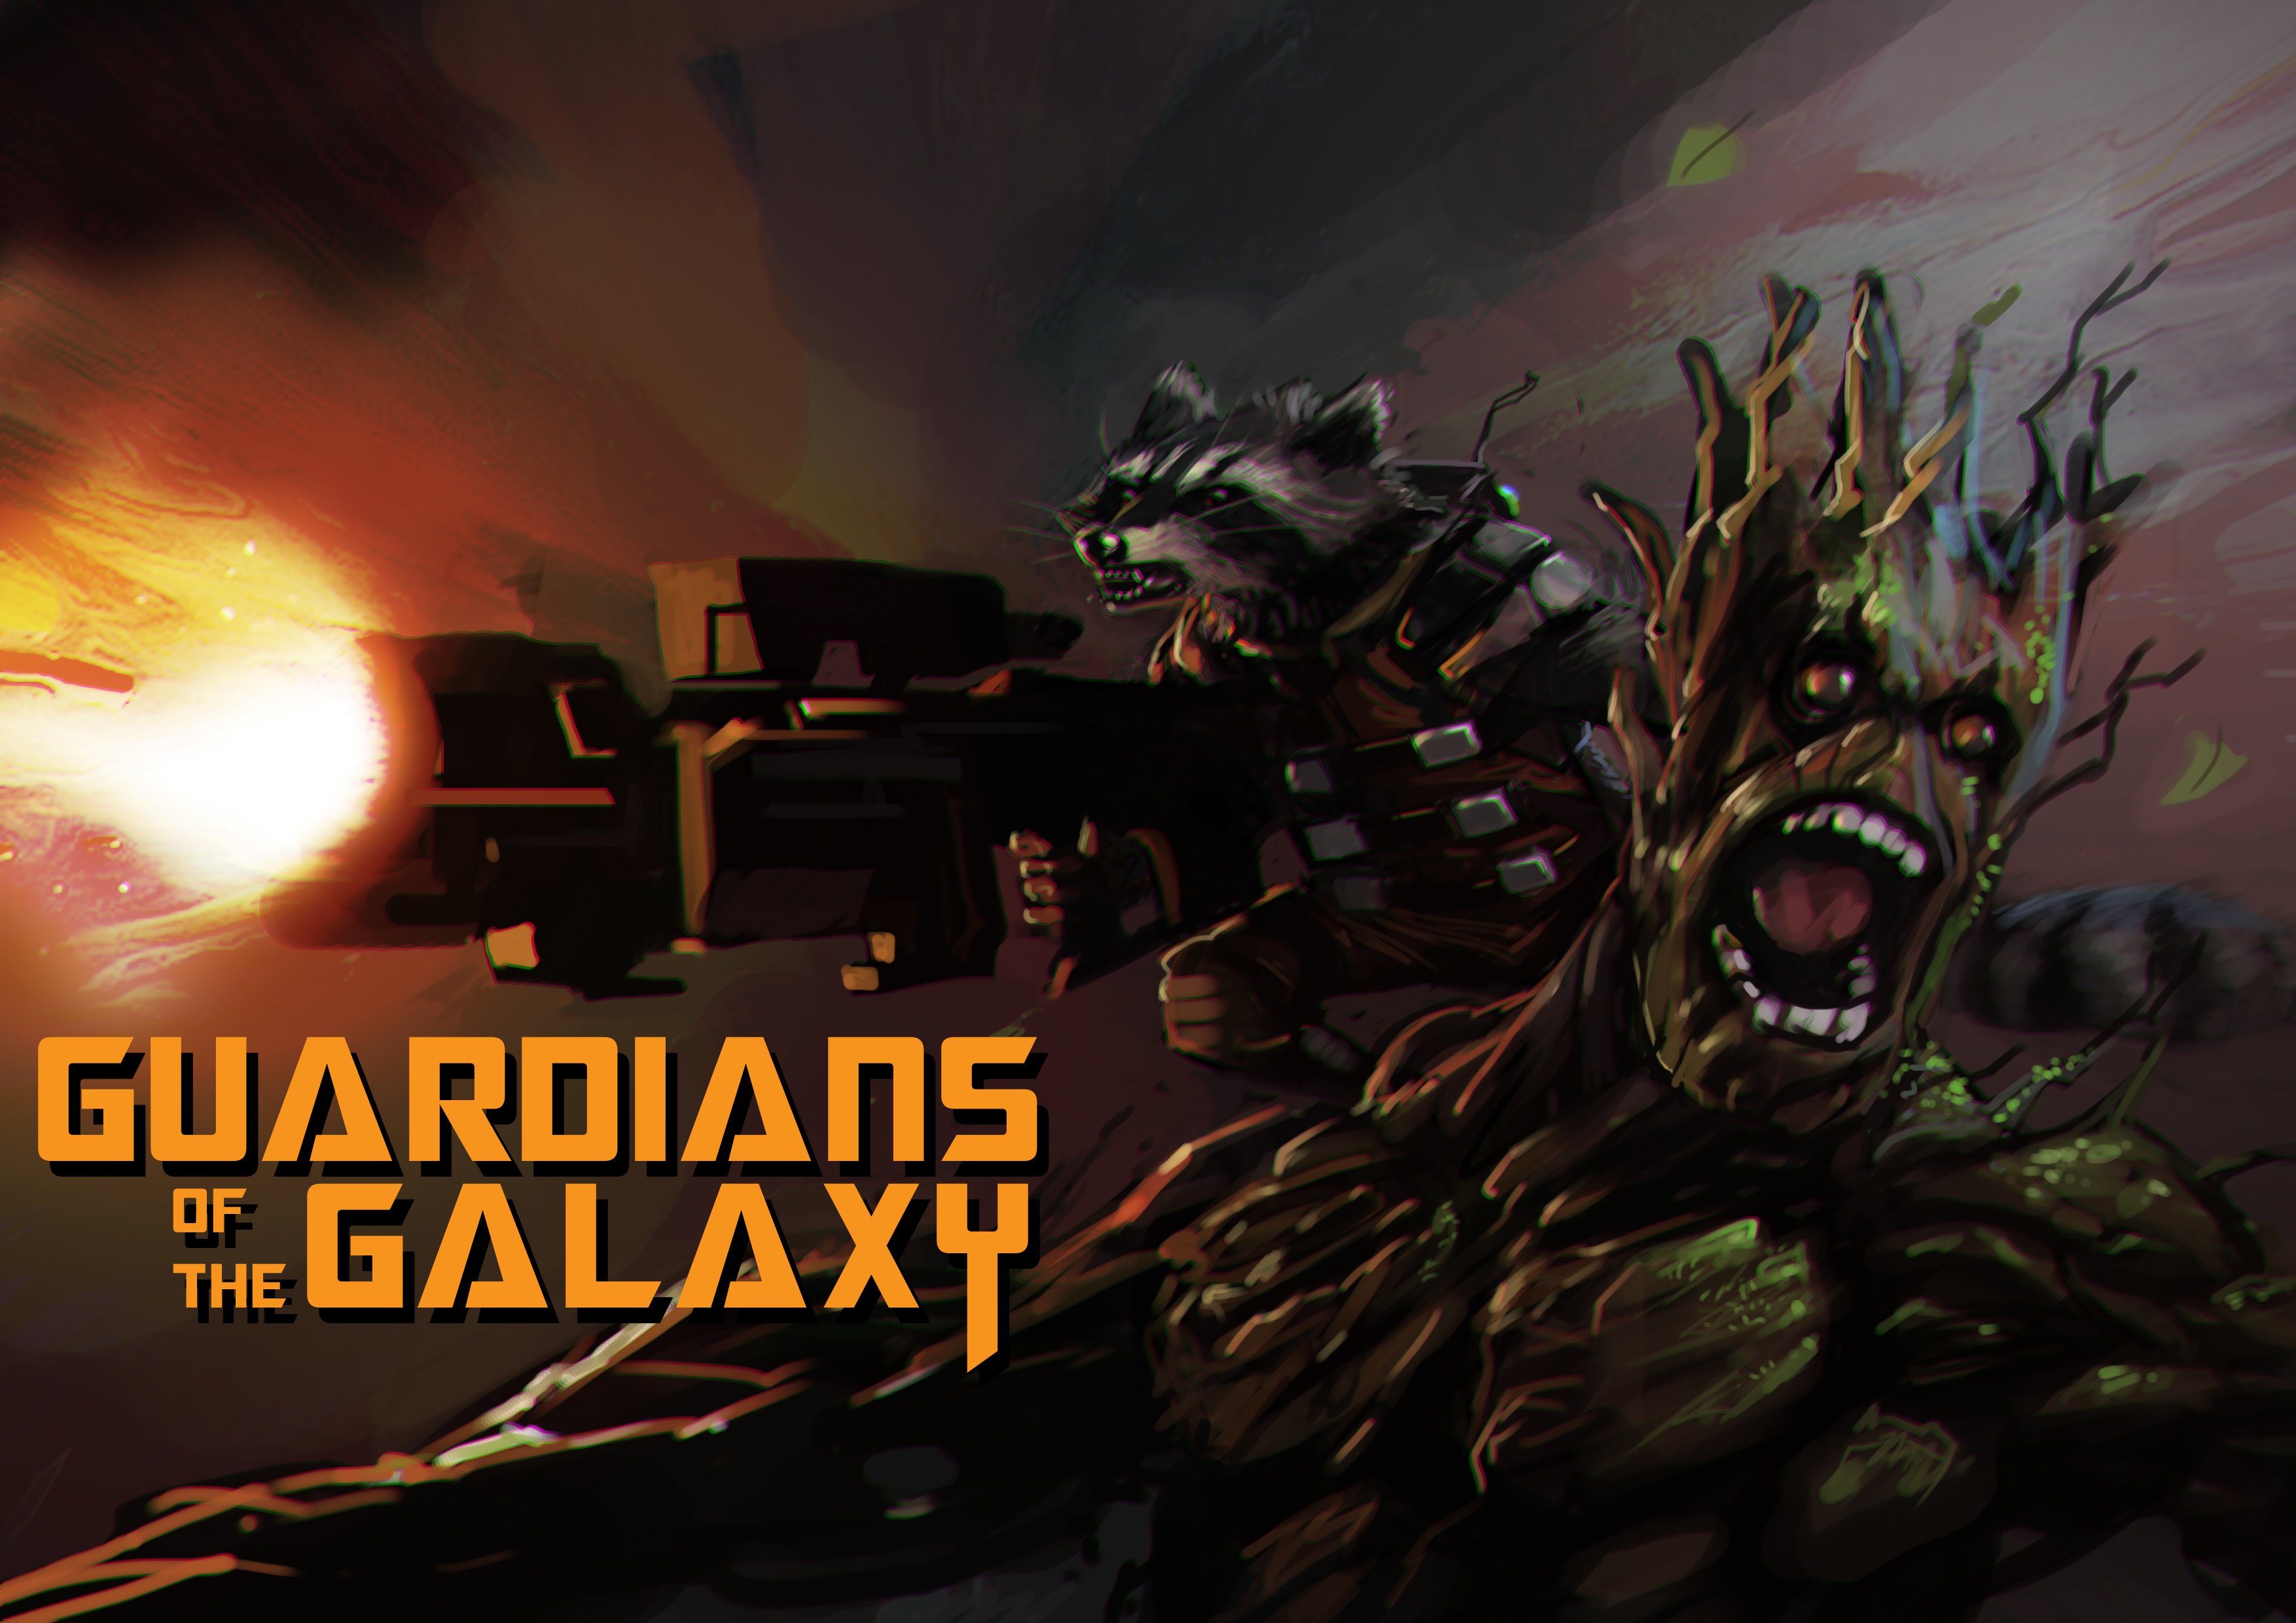 battle, Guardians, Of, The, Galaxy, Rocket, And, Groot, Movies, Fantasy, Sci fi Wallpaper